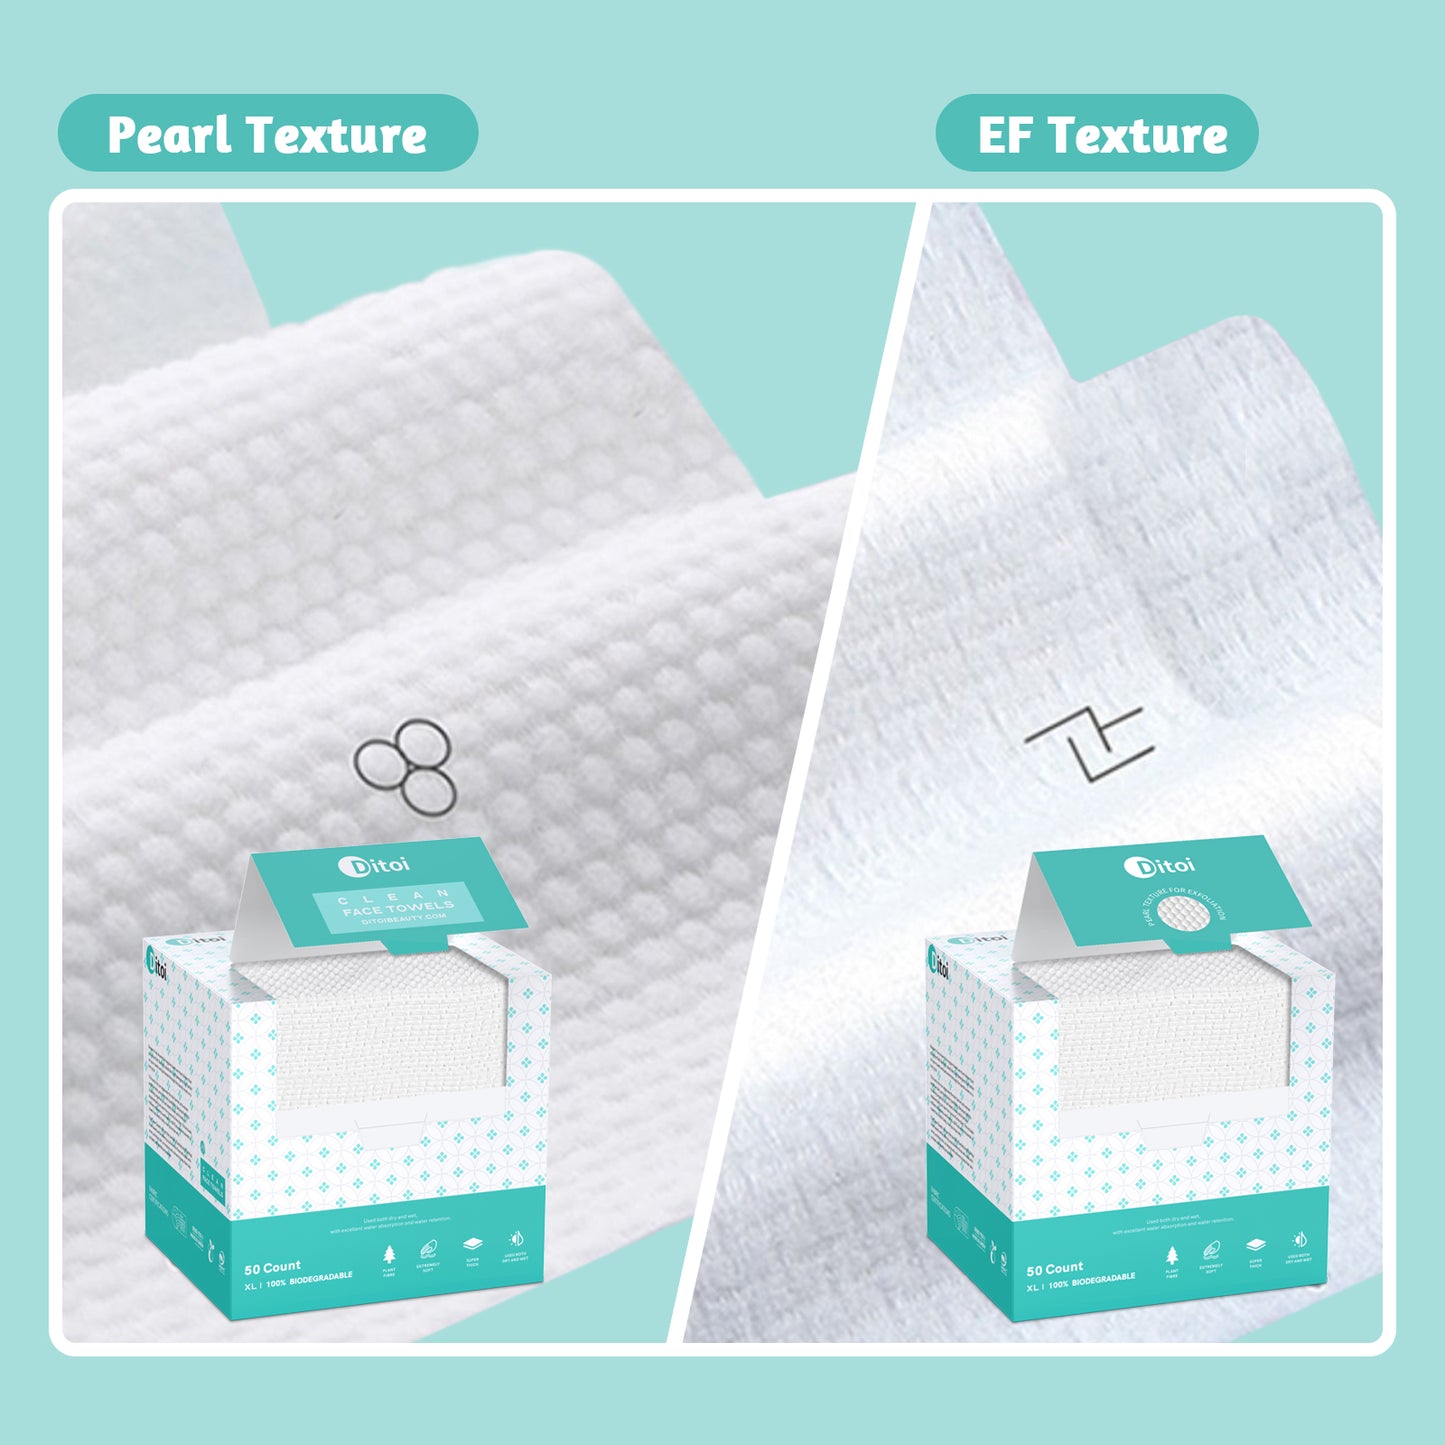 Ditoi Pearl Texture Disposable Face Towels 1 Pack, 50 Count